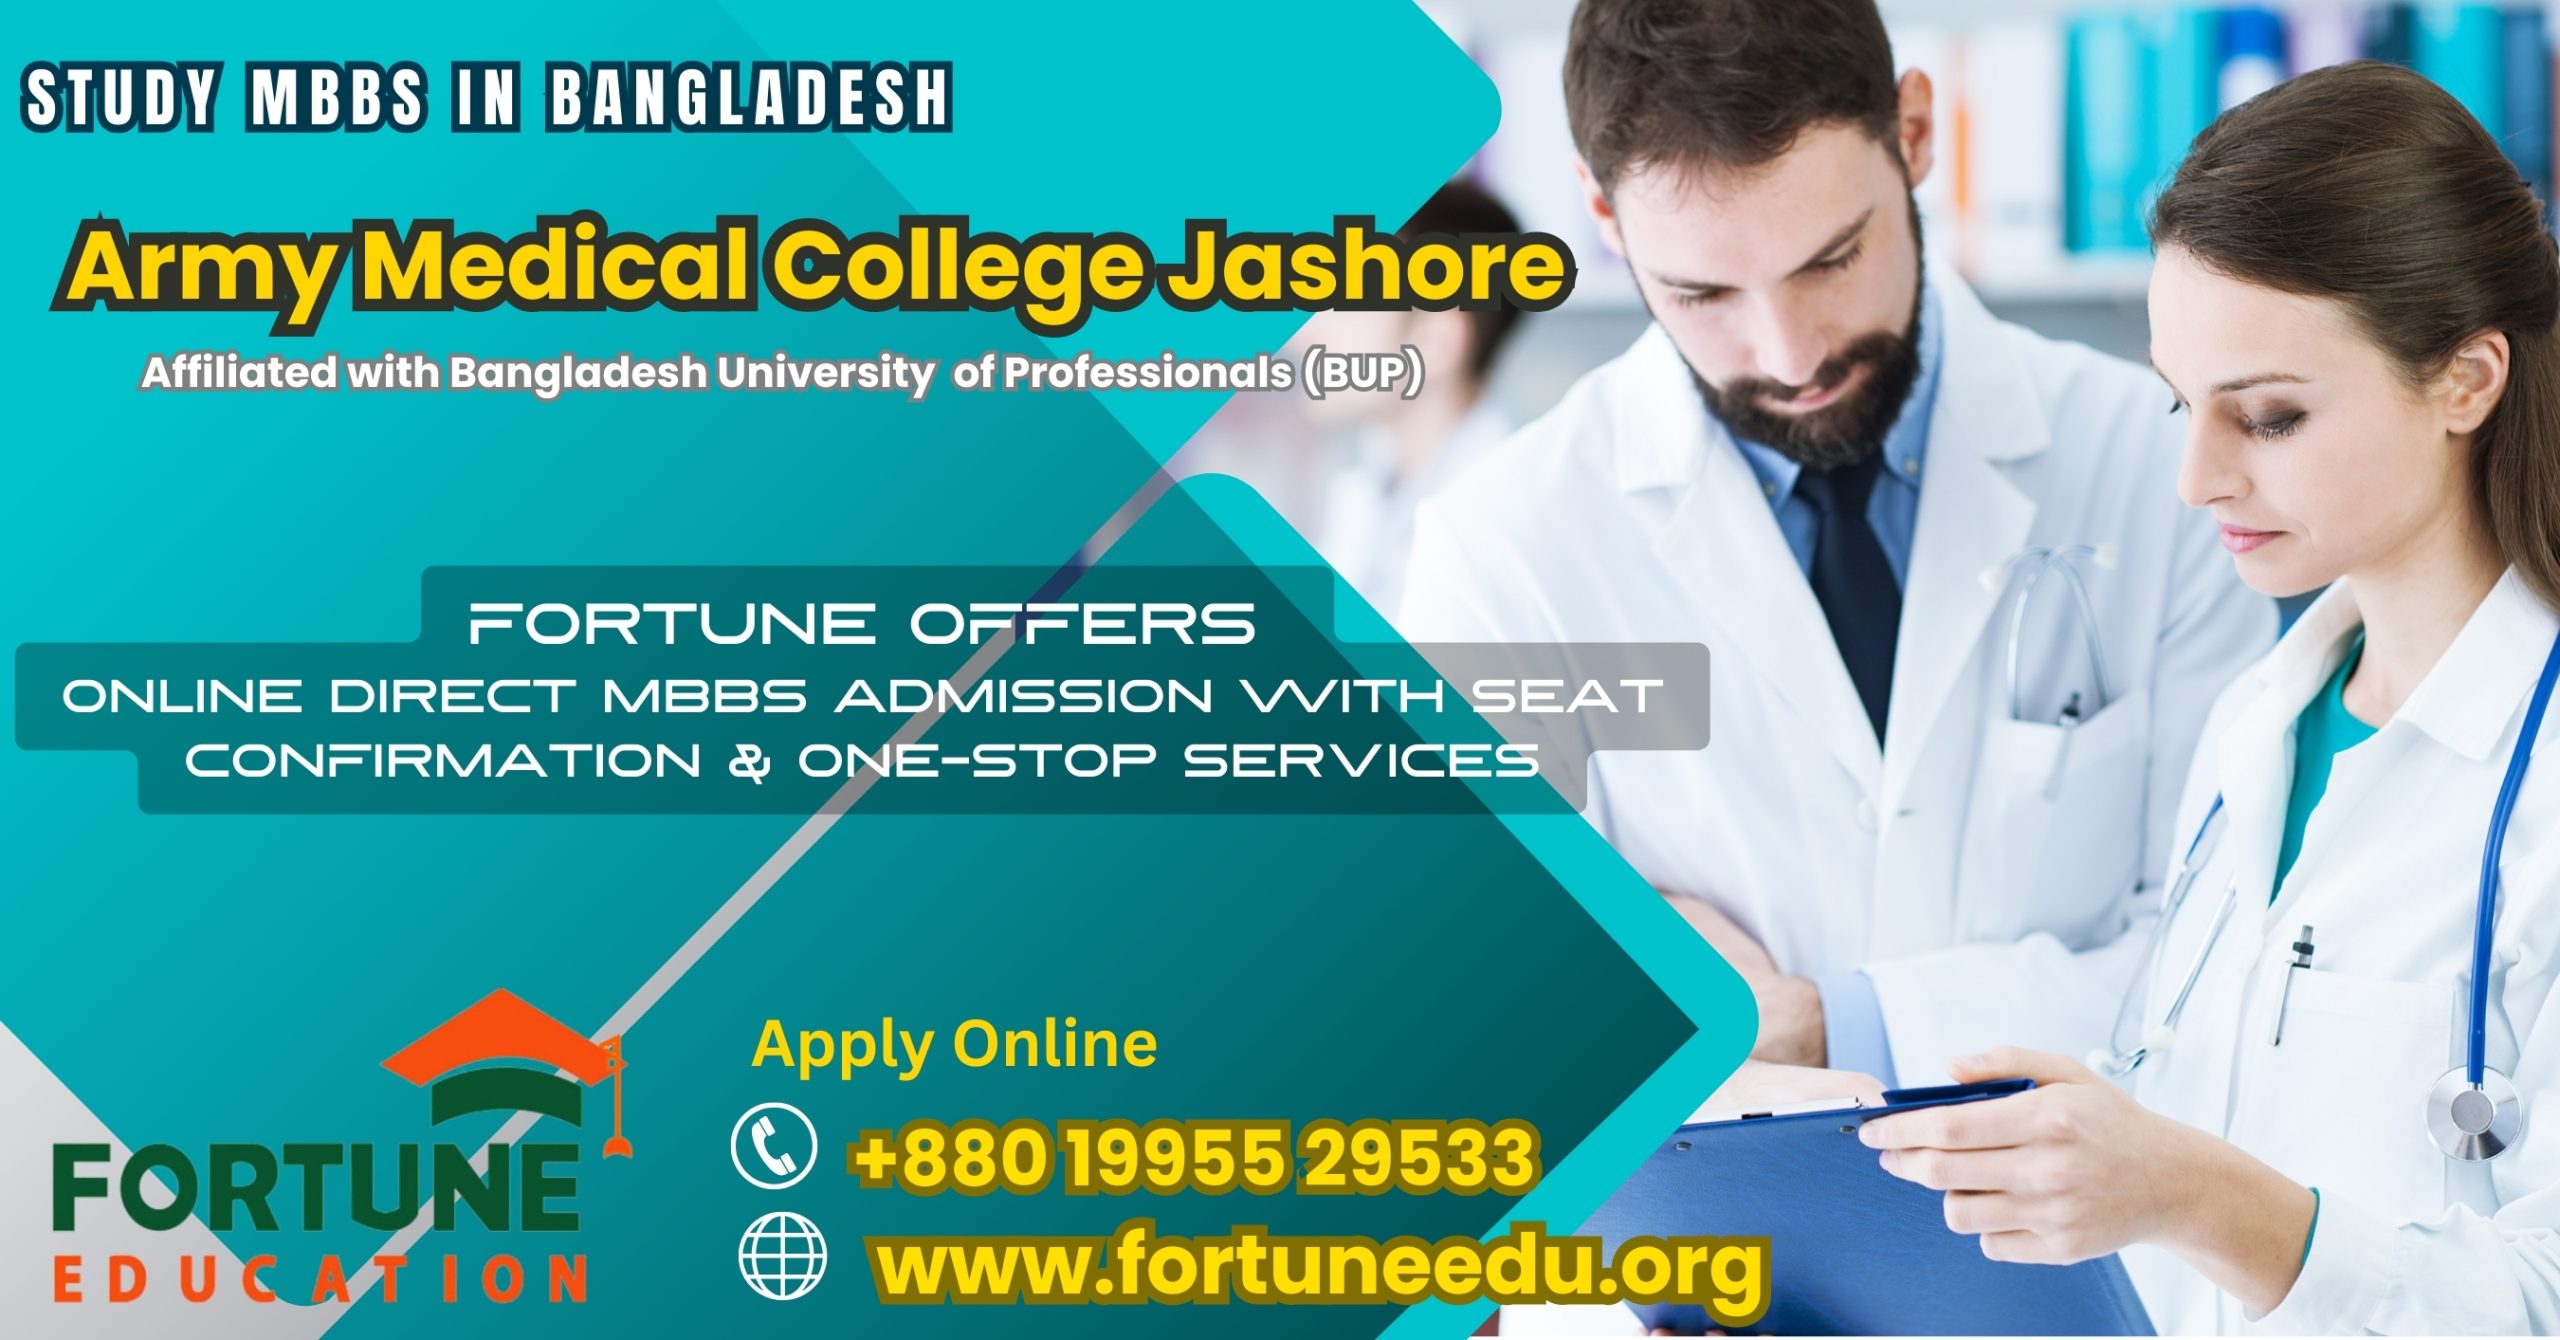 Online MBBS Admission at Army Medical College Jashore